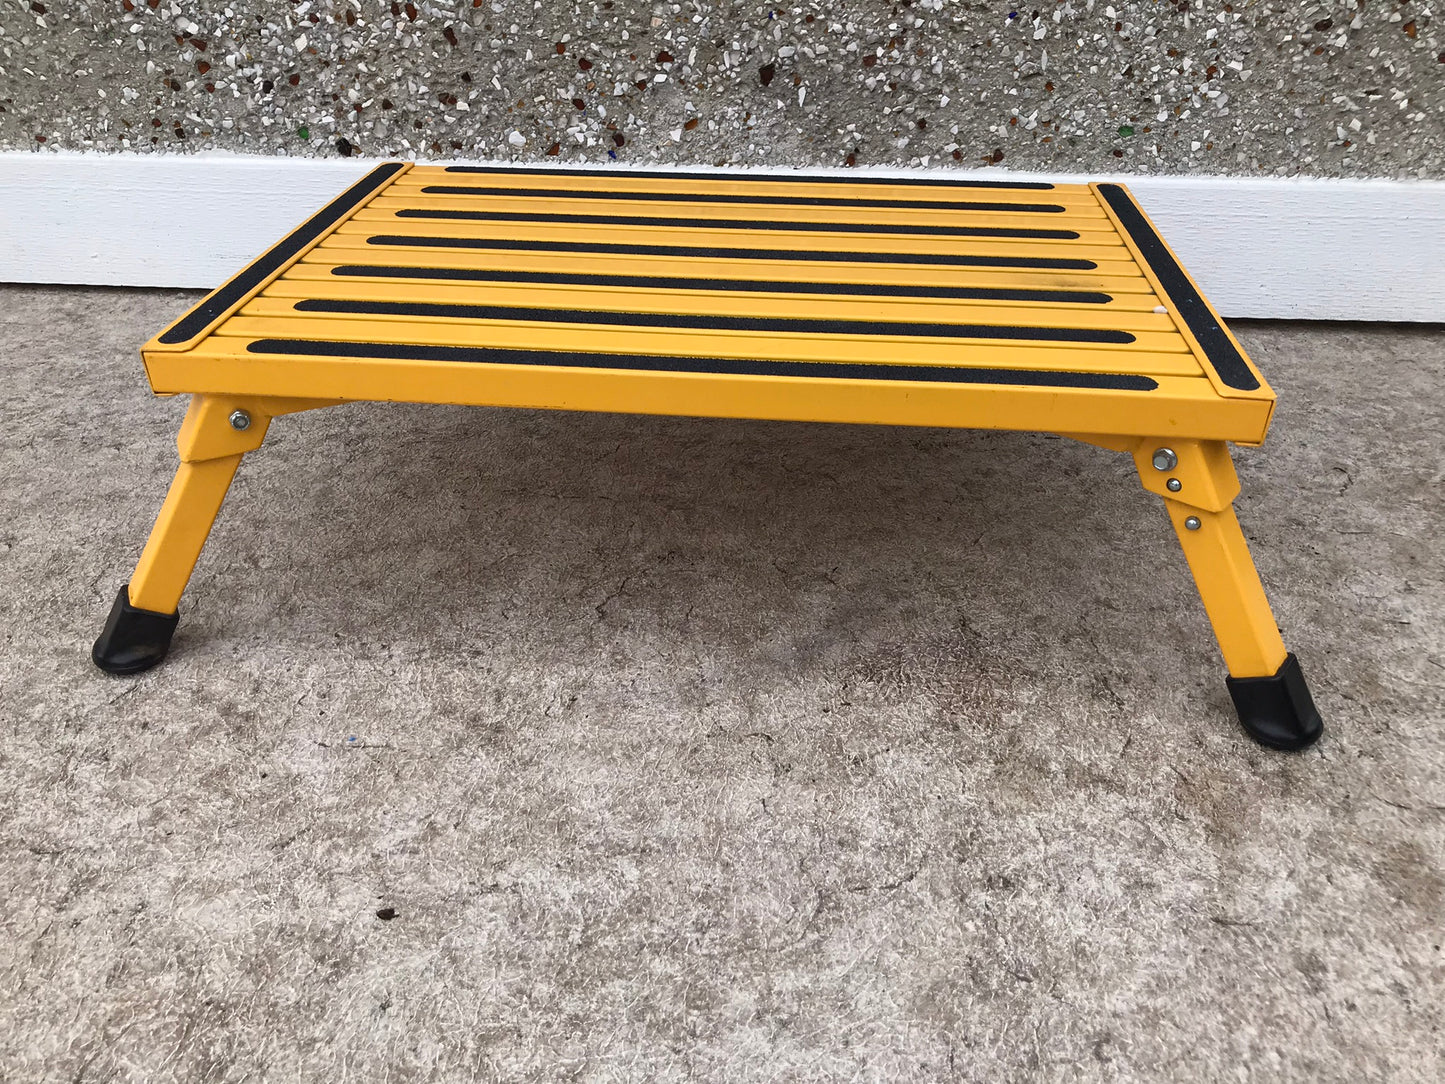 Camping Work Safety Step XL-08C-Y Yellow X-Large Folding Recreational RV Trailer Step Stool Holds 1000 Pounds Folding Non Slip 19 x 15 x 8 Inch Paid $249.99 AS NEW